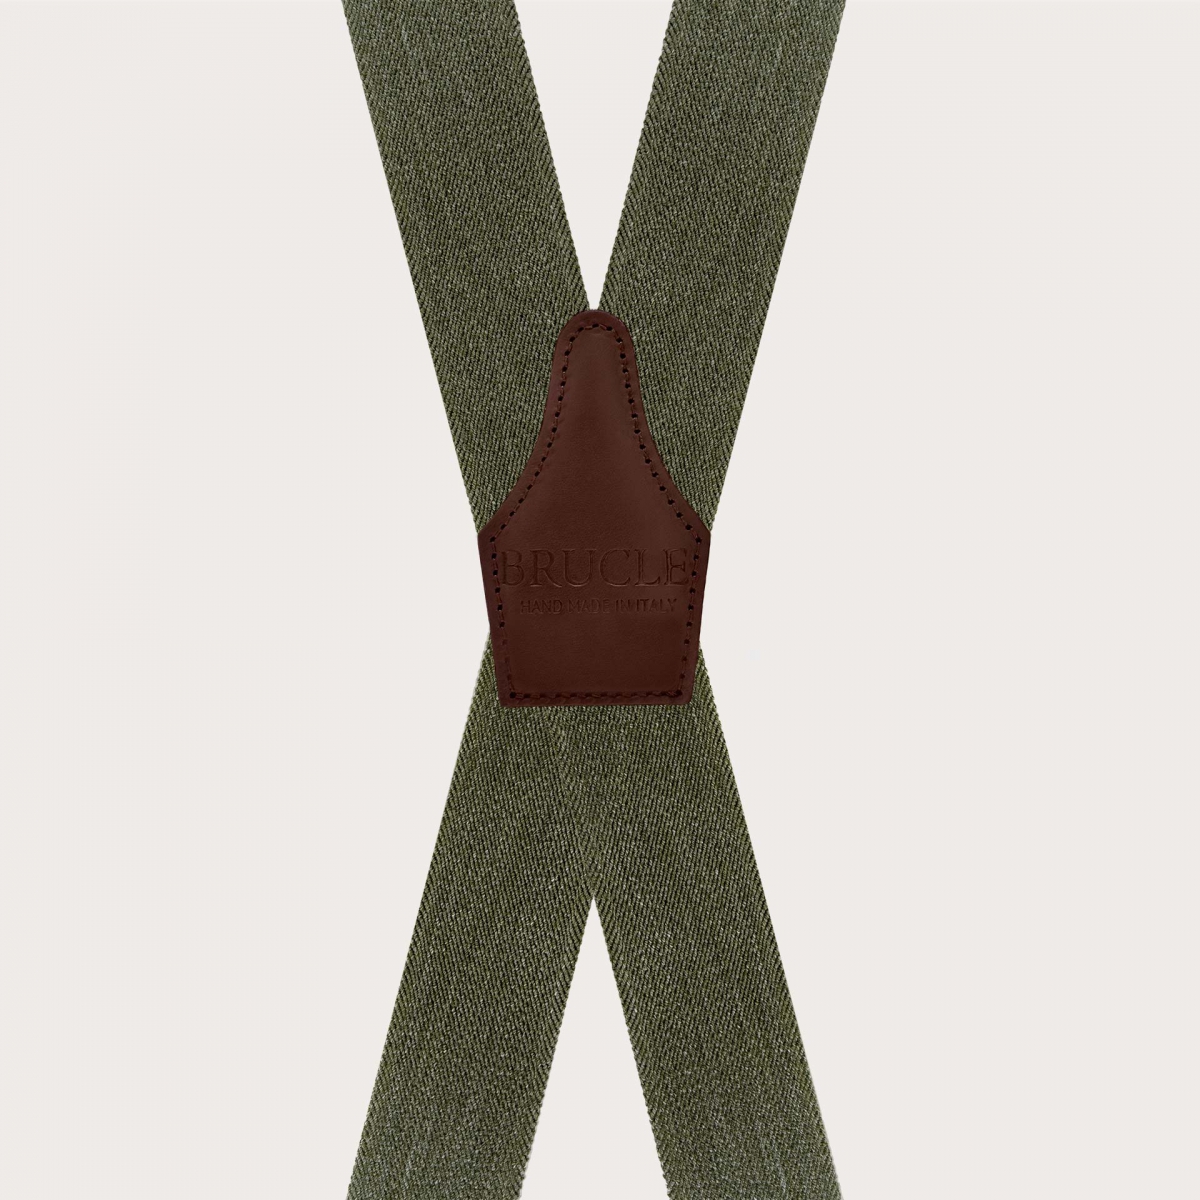 Green jeans-effect suspenders in X shape, clips only